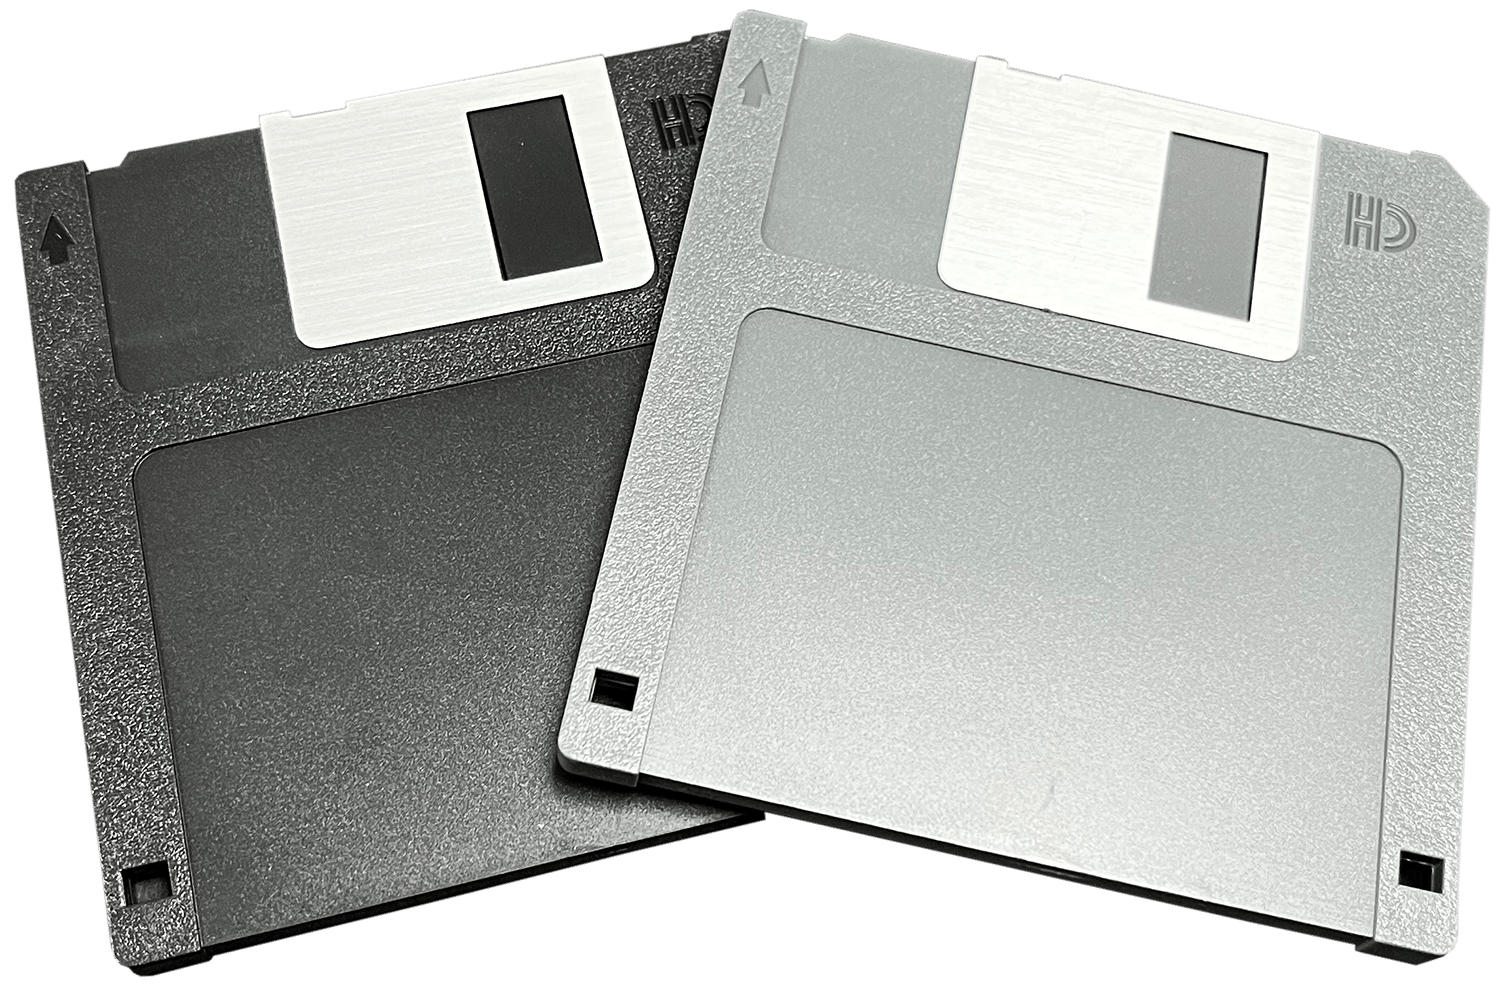 Grey and Black Floppy disk USB Drives